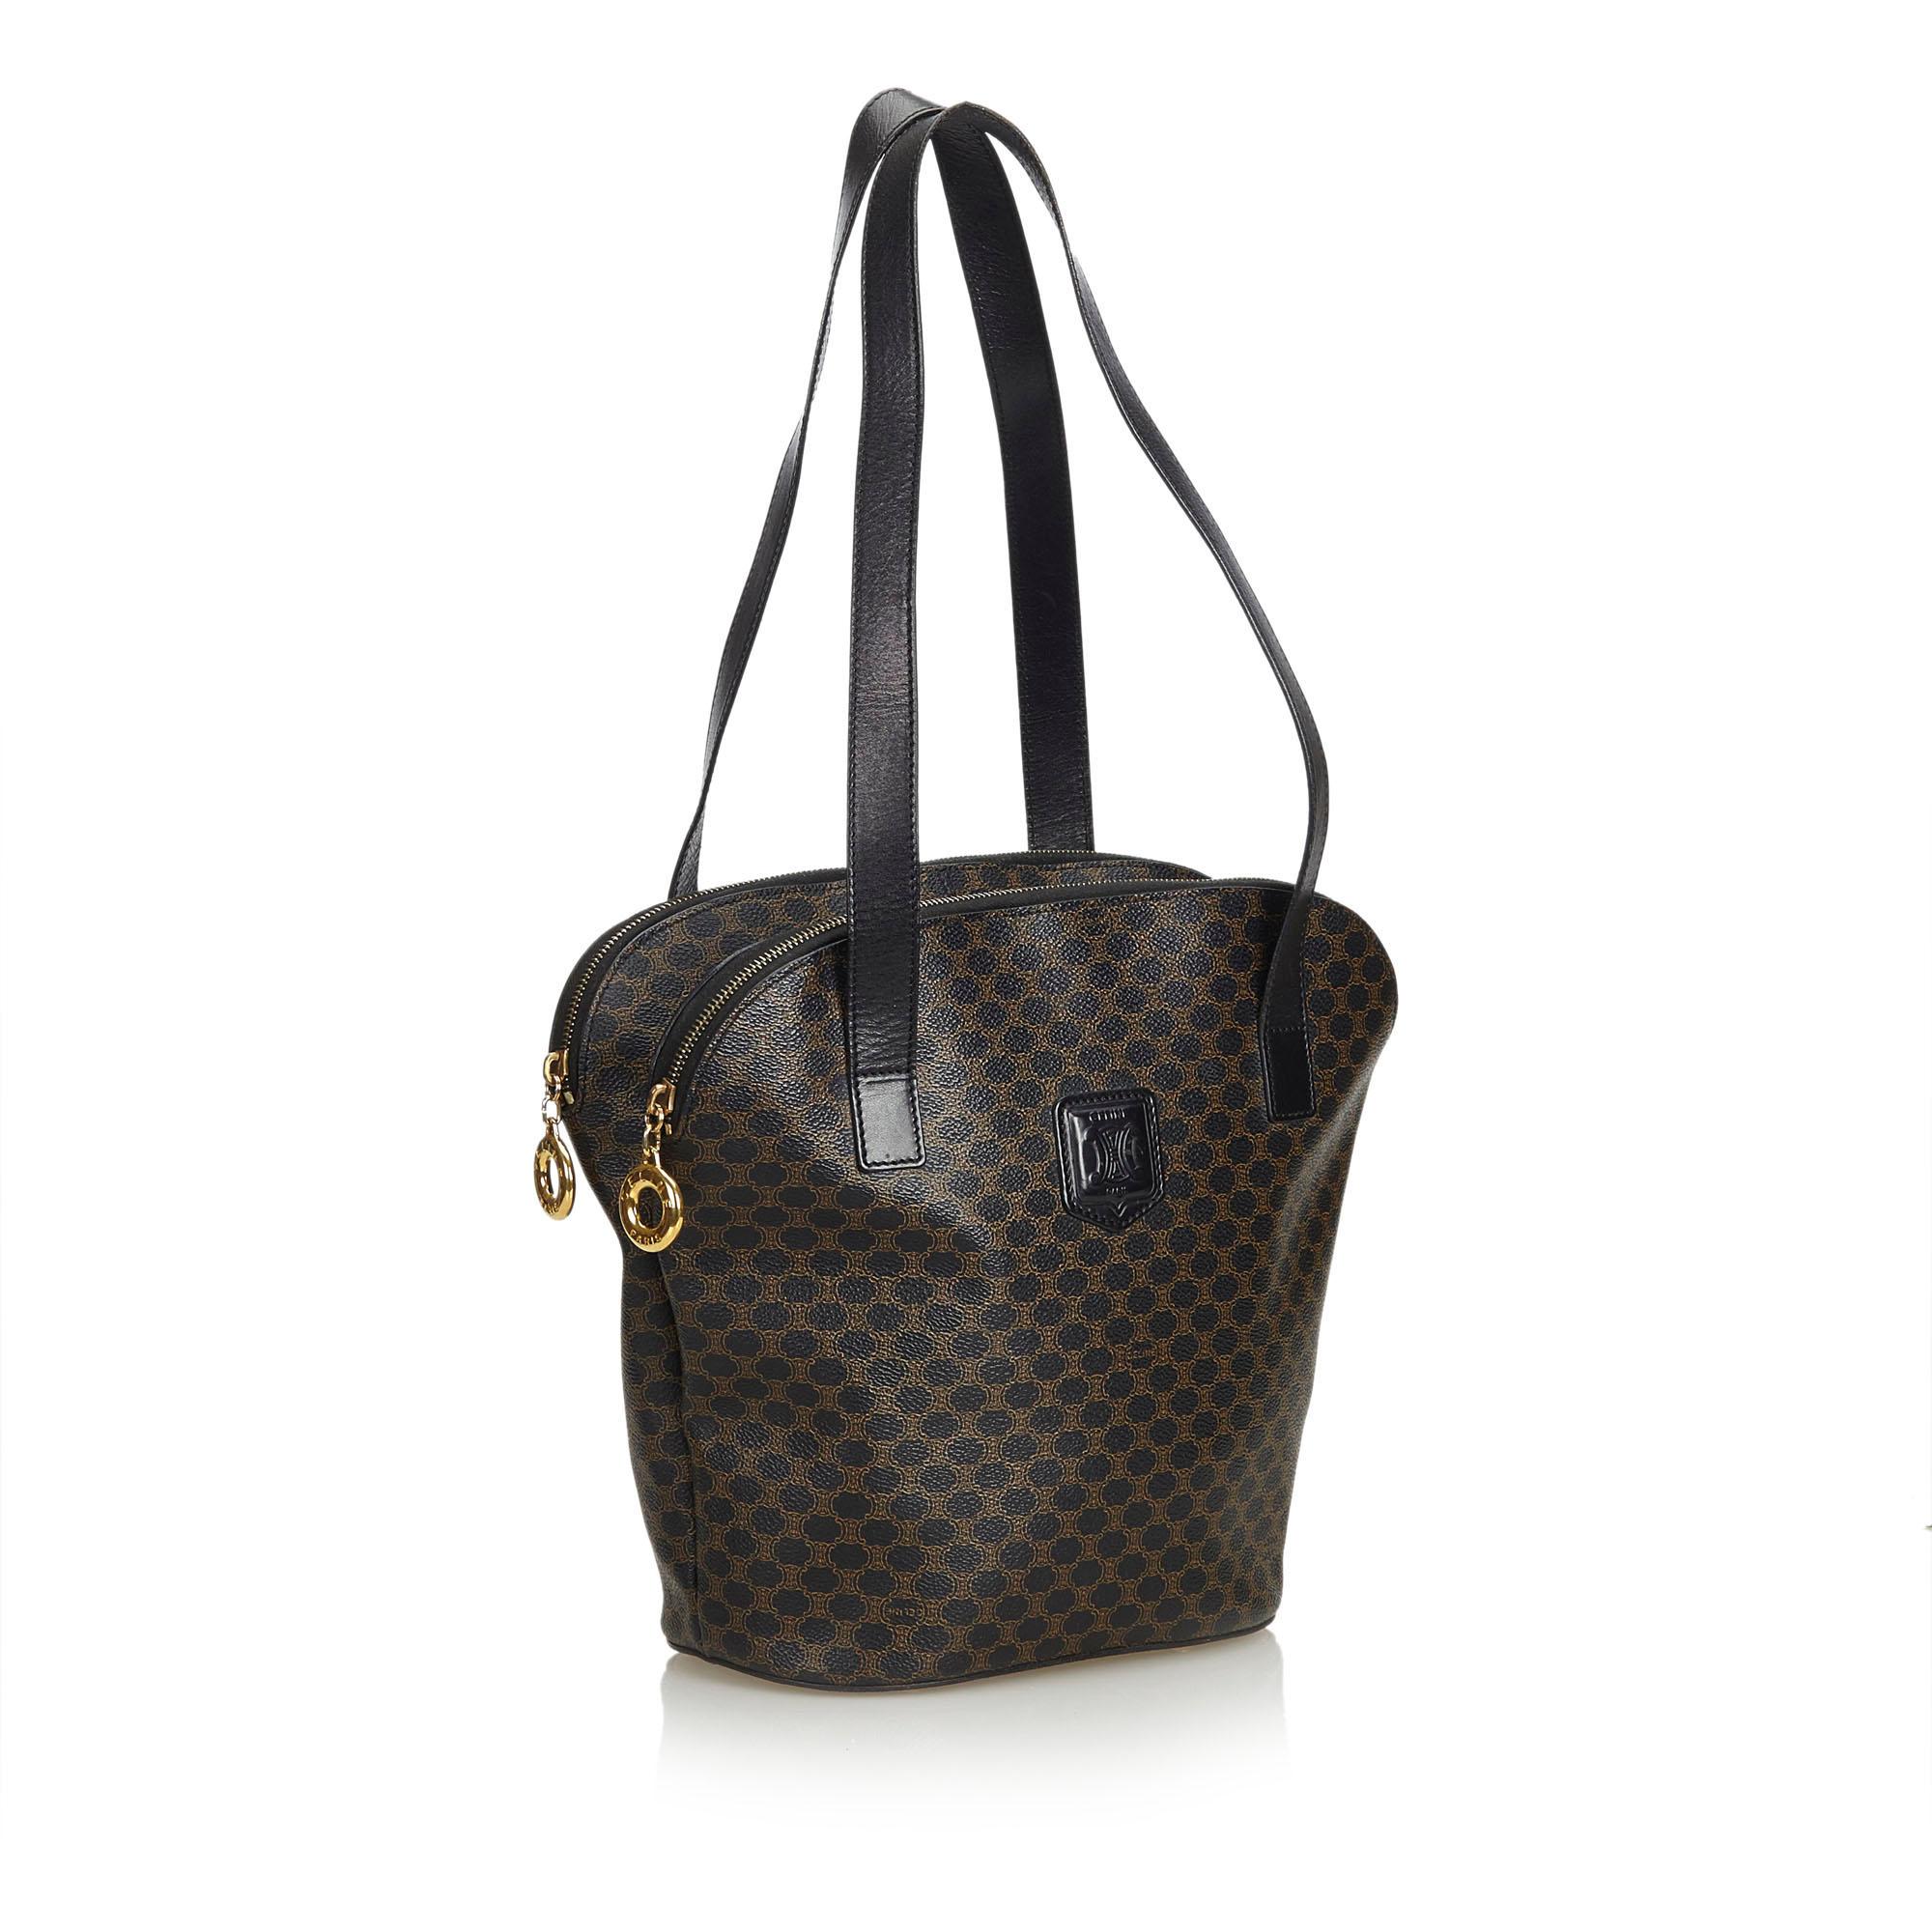 This tote bag features a PVC body, flat leather straps, double top zip closures, and an interior zip and slip pockets. It carries as B+ condition rating.

Inclusions: 
This item does not come with inclusions.

Dimensions:
Length: 28.00 cm
Width: